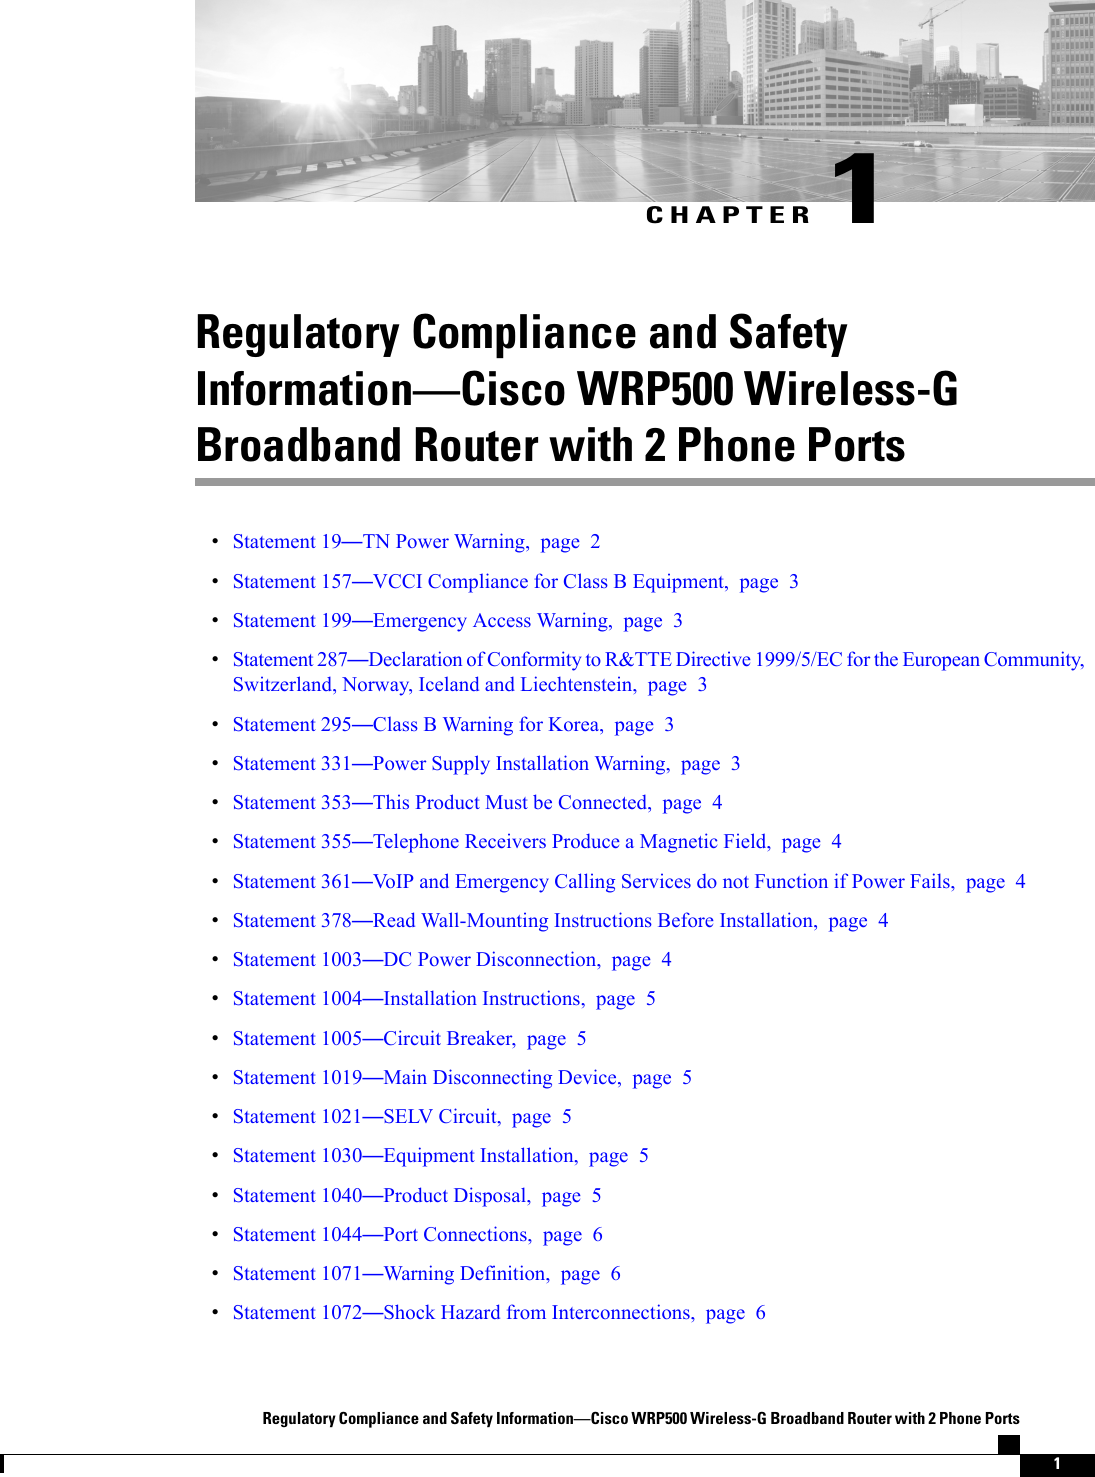 CHAPTER 1Regulatory Compliance and SafetyInformationCisco WRP500 Wireless-GBroadband Router with 2 Phone PortsStatement 19TN Power Warning, page 2Statement 157VCCI Compliance for Class B Equipment, page 3Statement 199Emergency Access Warning, page 3Statement 287Declaration of Conformity to R&amp;TTE Directive 1999/5/EC for the European Community,Switzerland, Norway, Iceland and Liechtenstein, page 3Statement 295Class B Warning for Korea, page 3Statement 331Power Supply Installation Warning, page 3Statement 353This Product Must be Connected, page 4Statement 355Telephone Receivers Produce a Magnetic Field, page 4Statement 361VoIP and Emergency Calling Services do not Function if Power Fails, page 4Statement 378Read Wall-Mounting Instructions Before Installation, page 4Statement 1003DC Power Disconnection, page 4Statement 1004Installation Instructions, page 5Statement 1005Circuit Breaker, page 5Statement 1019Main Disconnecting Device, page 5Statement 1021SELV Circuit, page 5Statement 1030Equipment Installation, page 5Statement 1040Product Disposal, page 5Statement 1044Port Connections, page 6Statement 1071Warning Definition, page 6Statement 1072Shock Hazard from Interconnections, page 6Regulatory Compliance and Safety InformationCisco WRP500 Wireless-G Broadband Router with 2 Phone Ports1